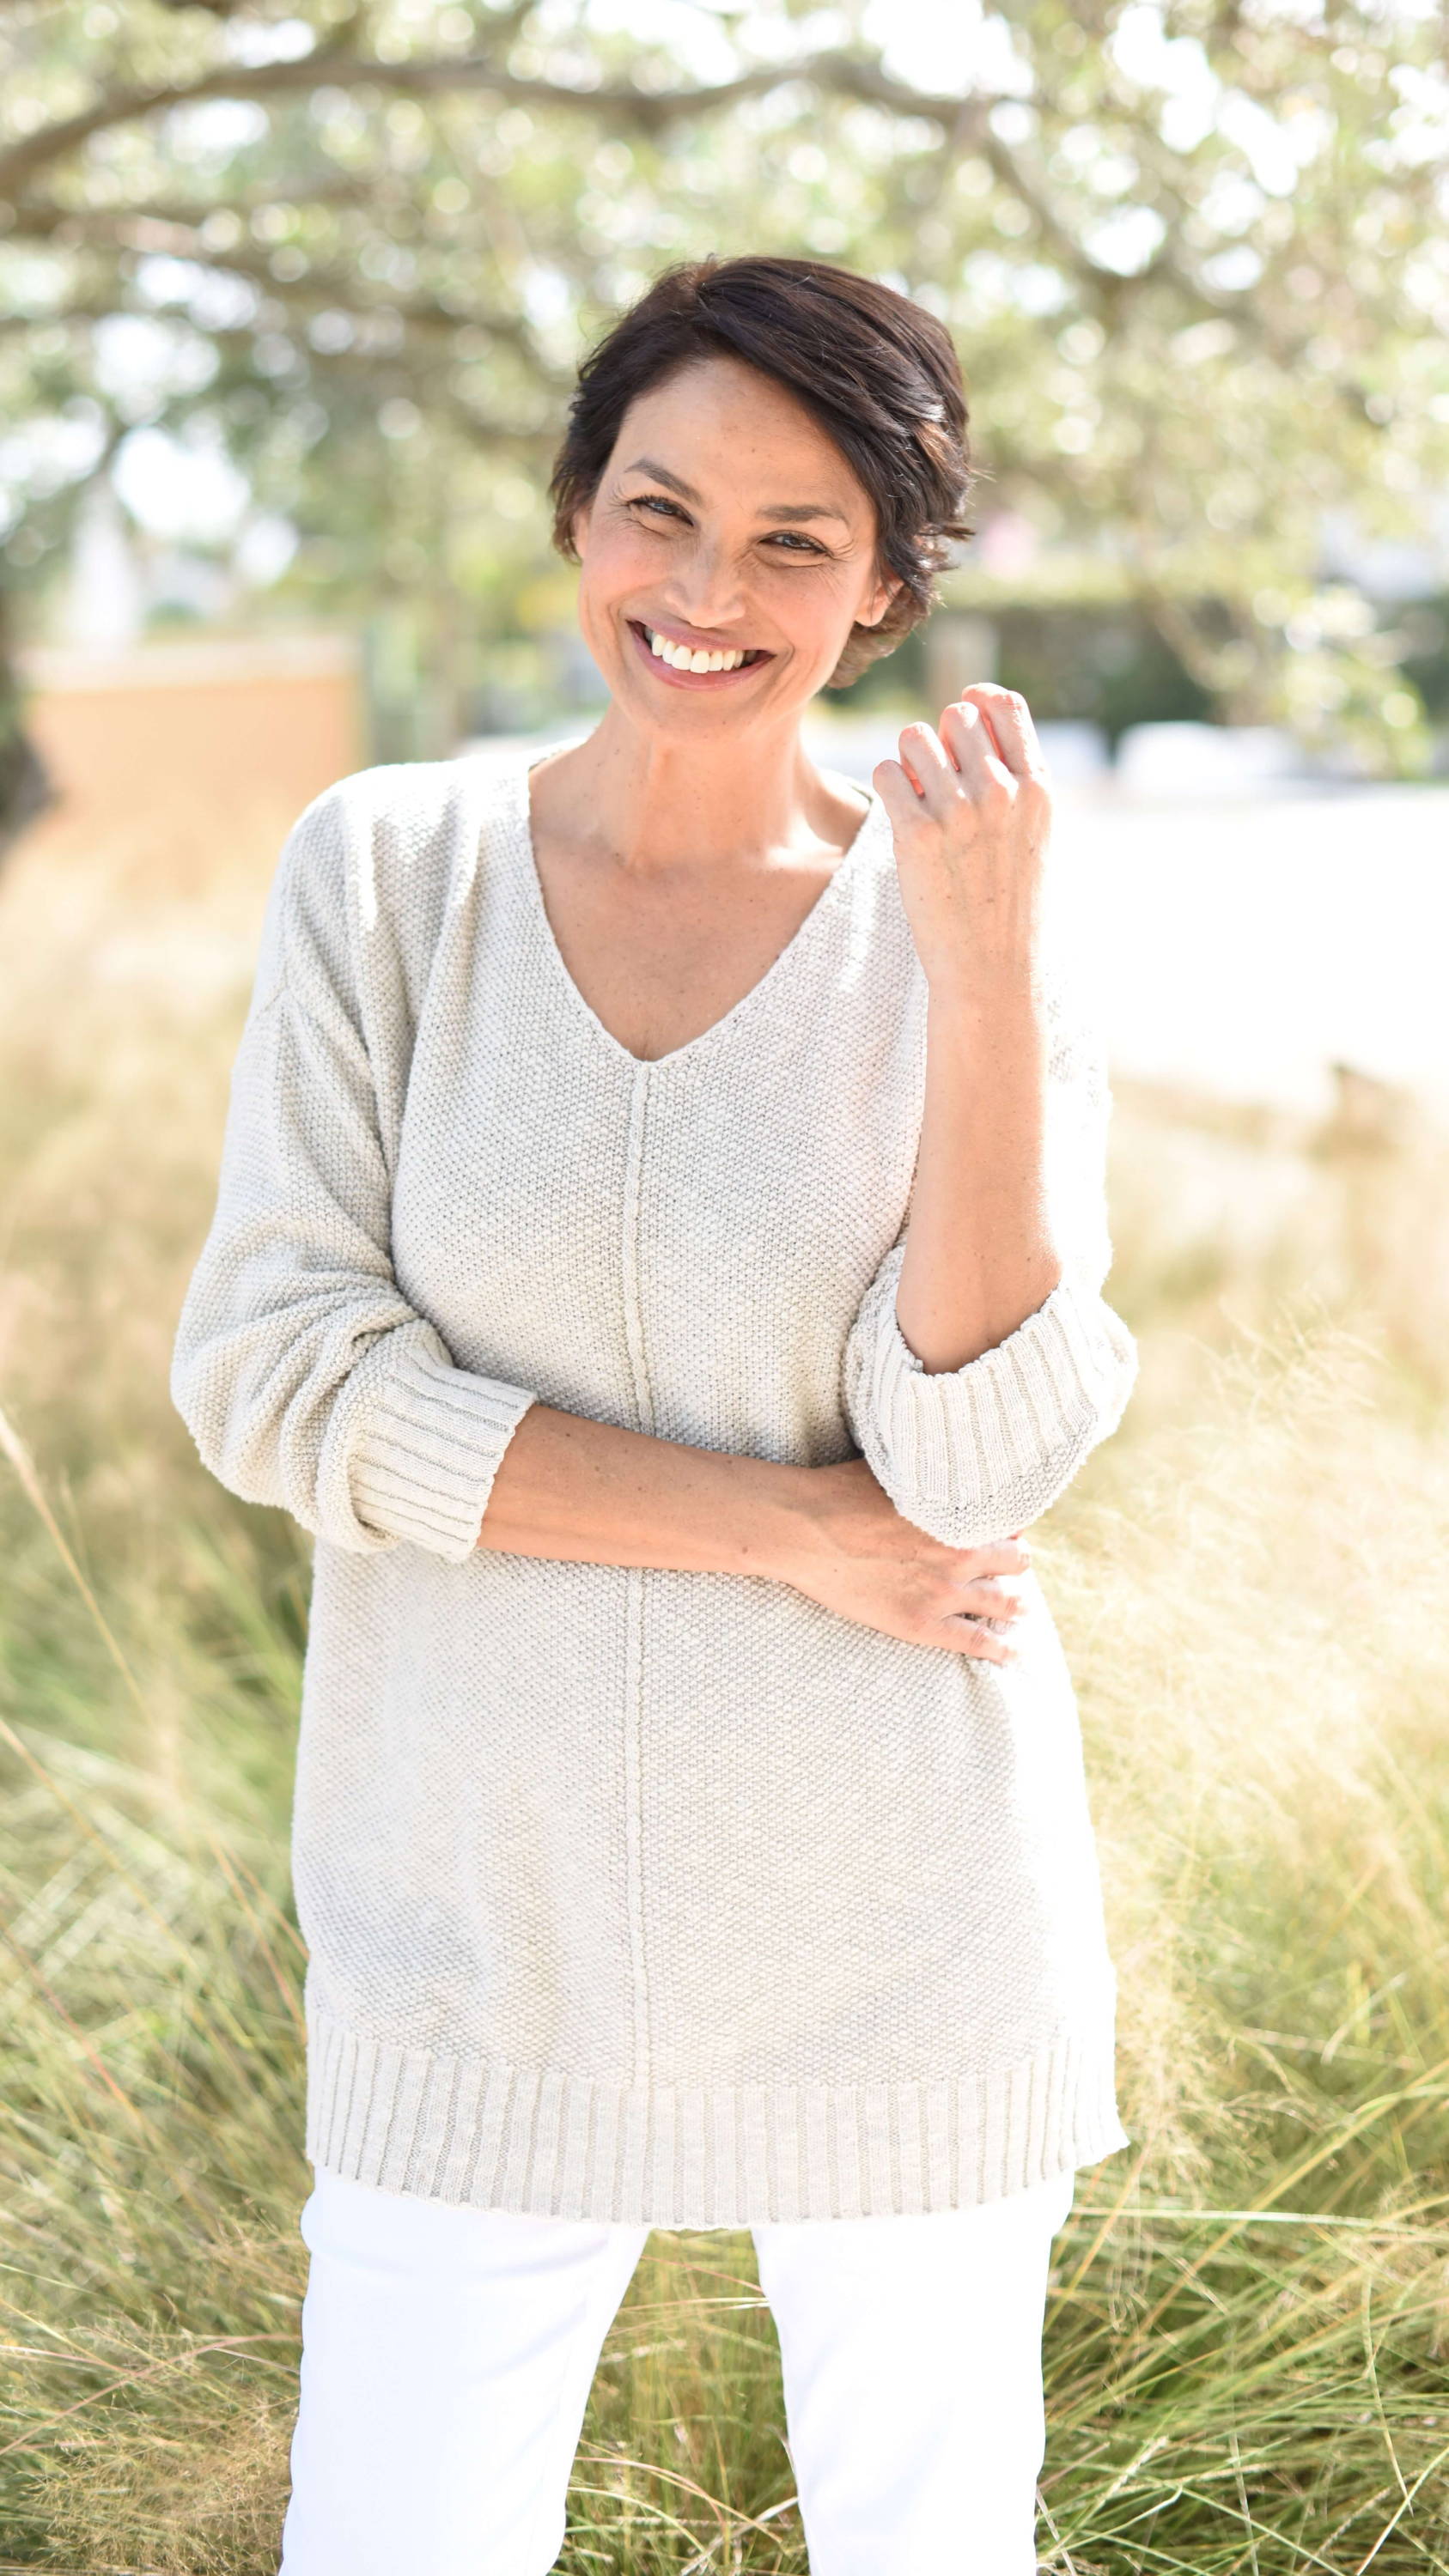 A smiling woman with short dark hair wears a tan sweater and white pants as she stands in a field